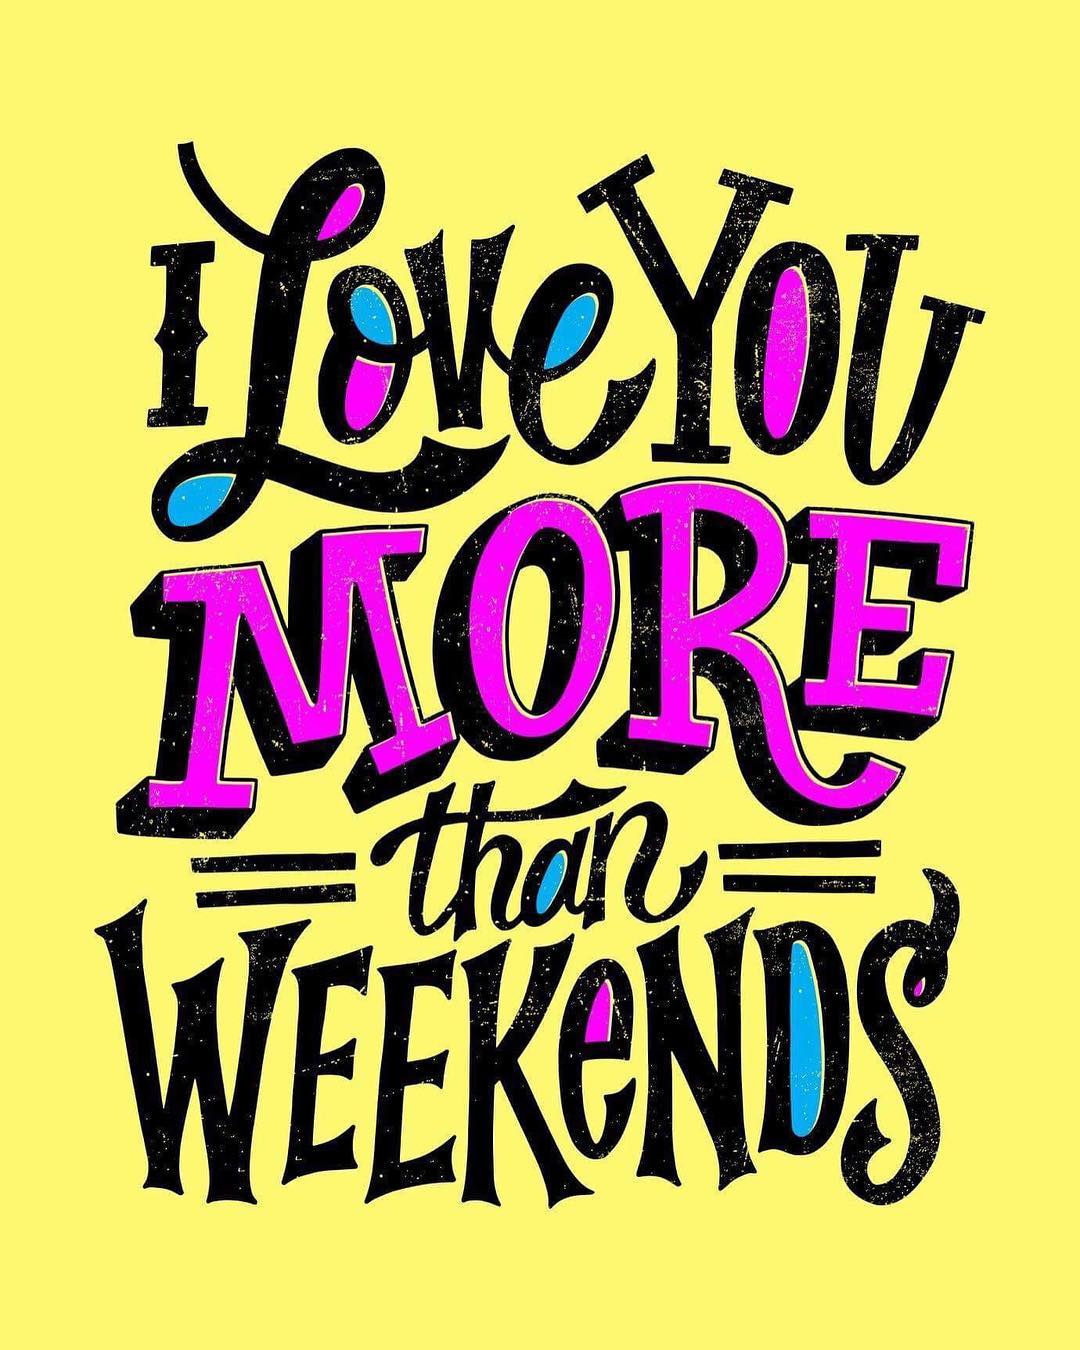 Quote with yellow background that says I love you more than weekends. Photo by Instagram user @facebook